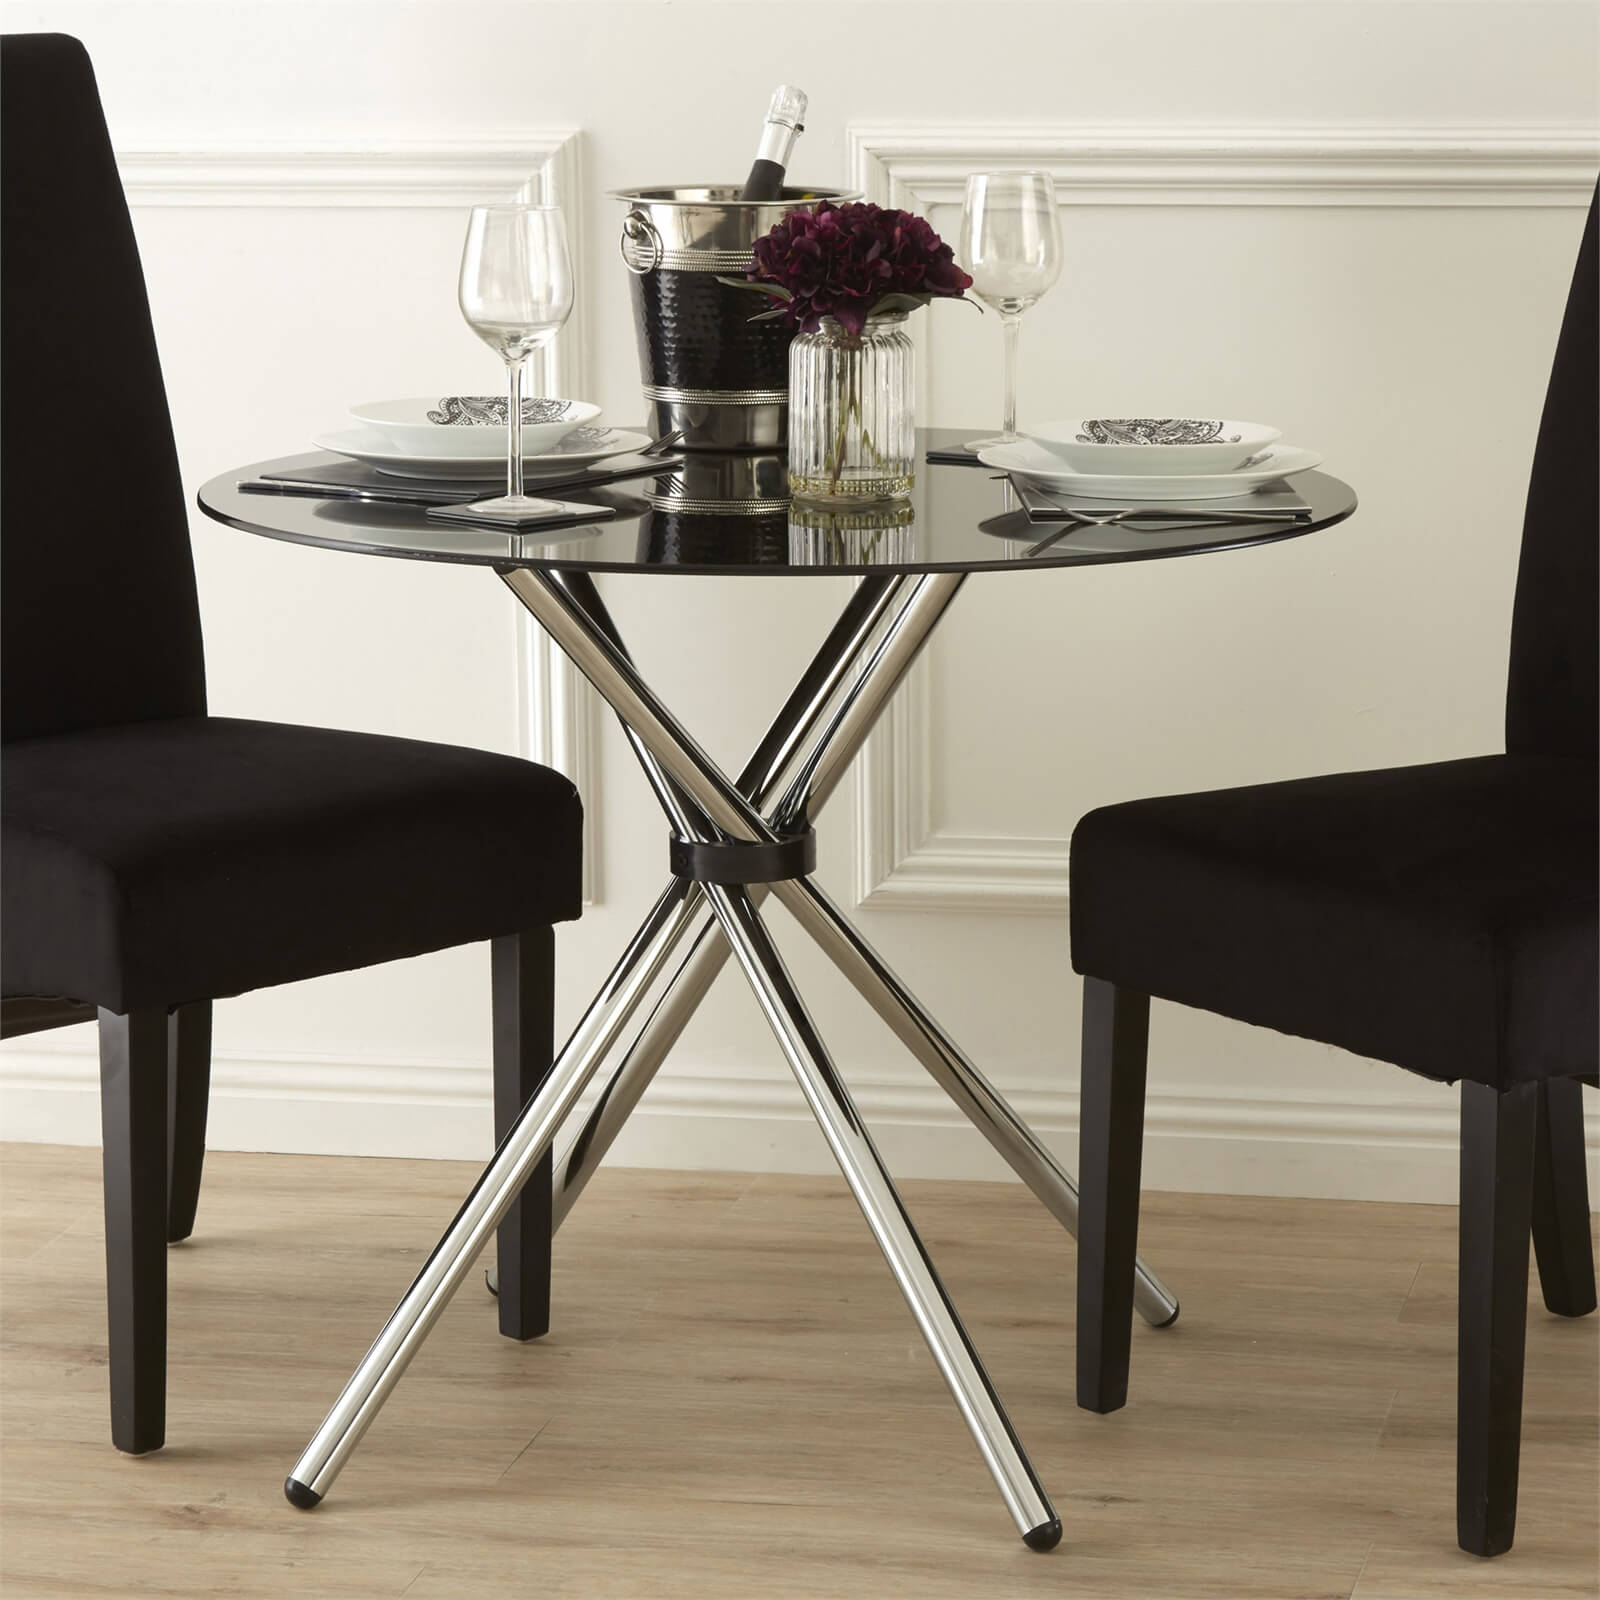 Black Tempered Glass Dining Table